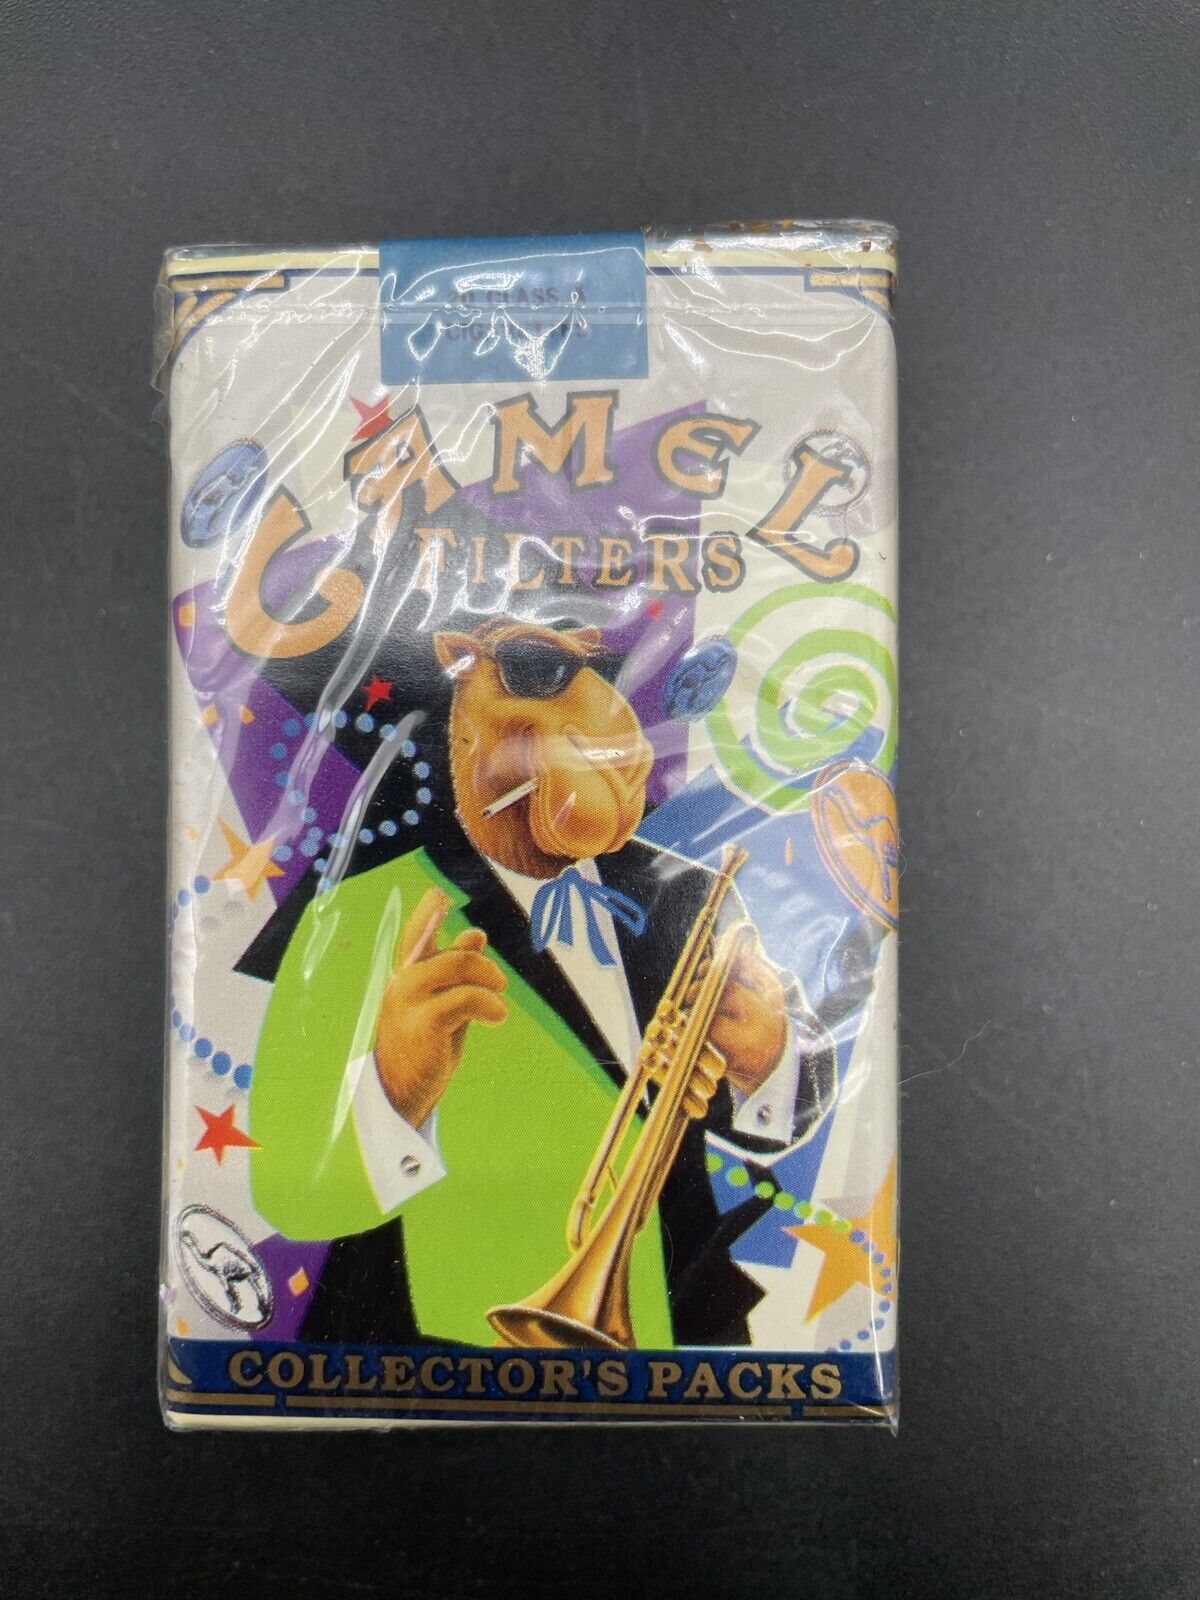 Joe Camel Camel Filters Soft Pack Collectors Pack Empty For Display Only